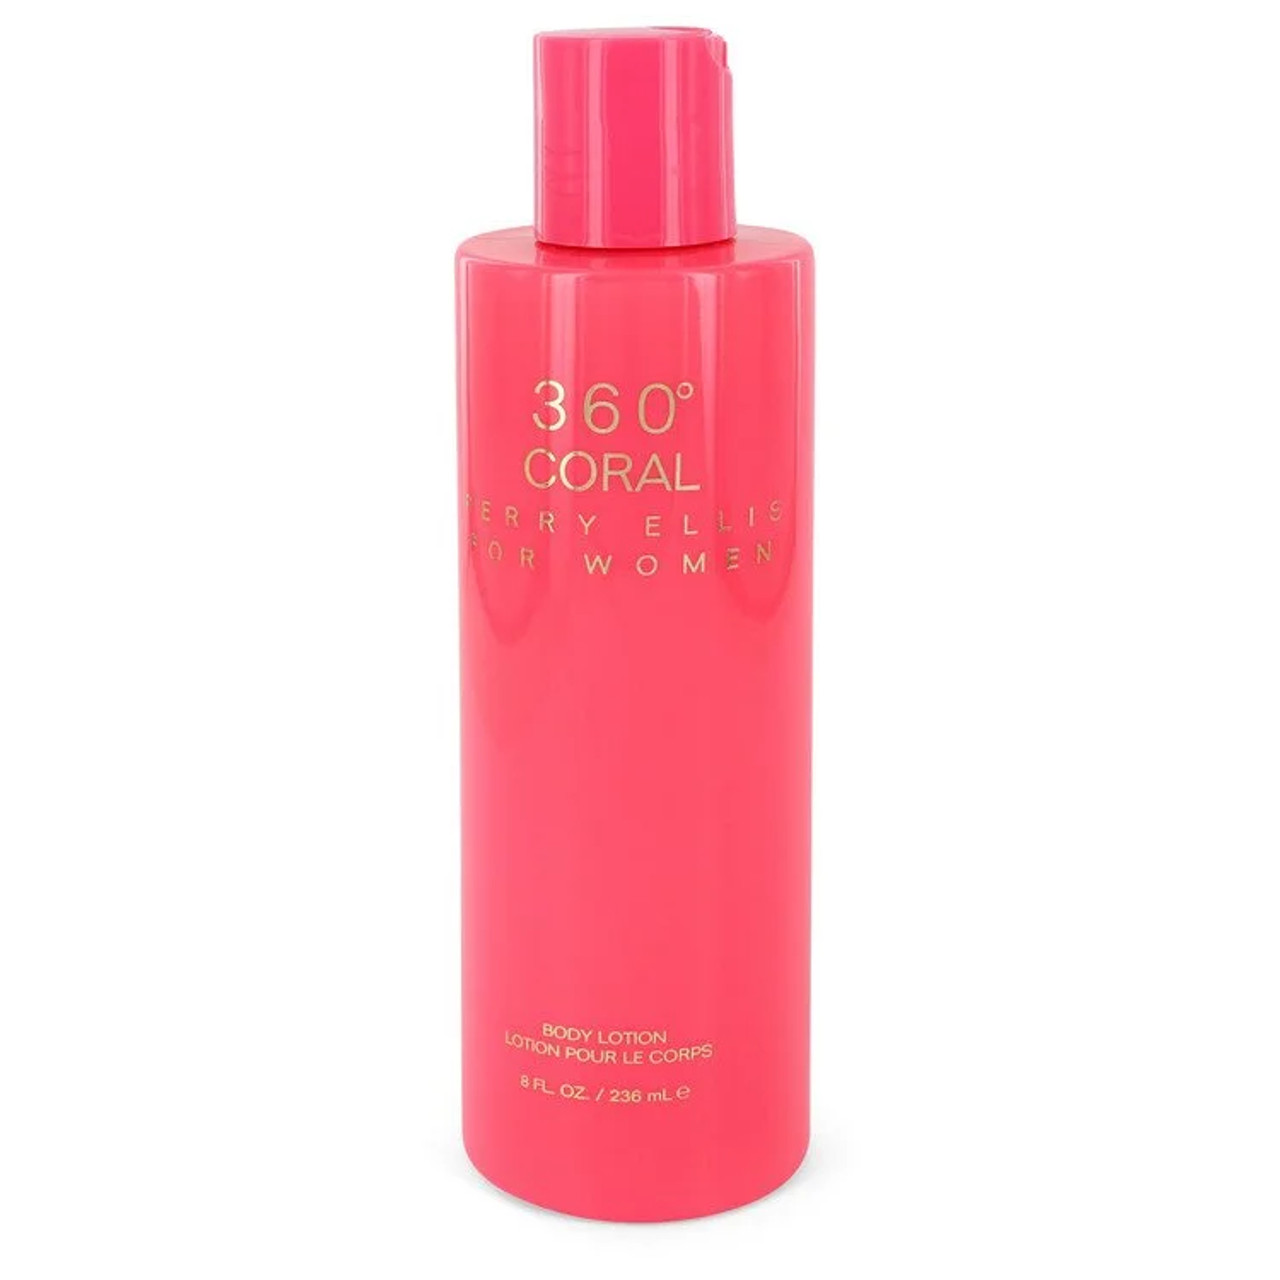 Perry Ellis 360 Coral Perfume By Perry Ellis Body Lotion 8 oz for Women - [From 33.00 - Choose pk Qty ] - *Ships from Miami